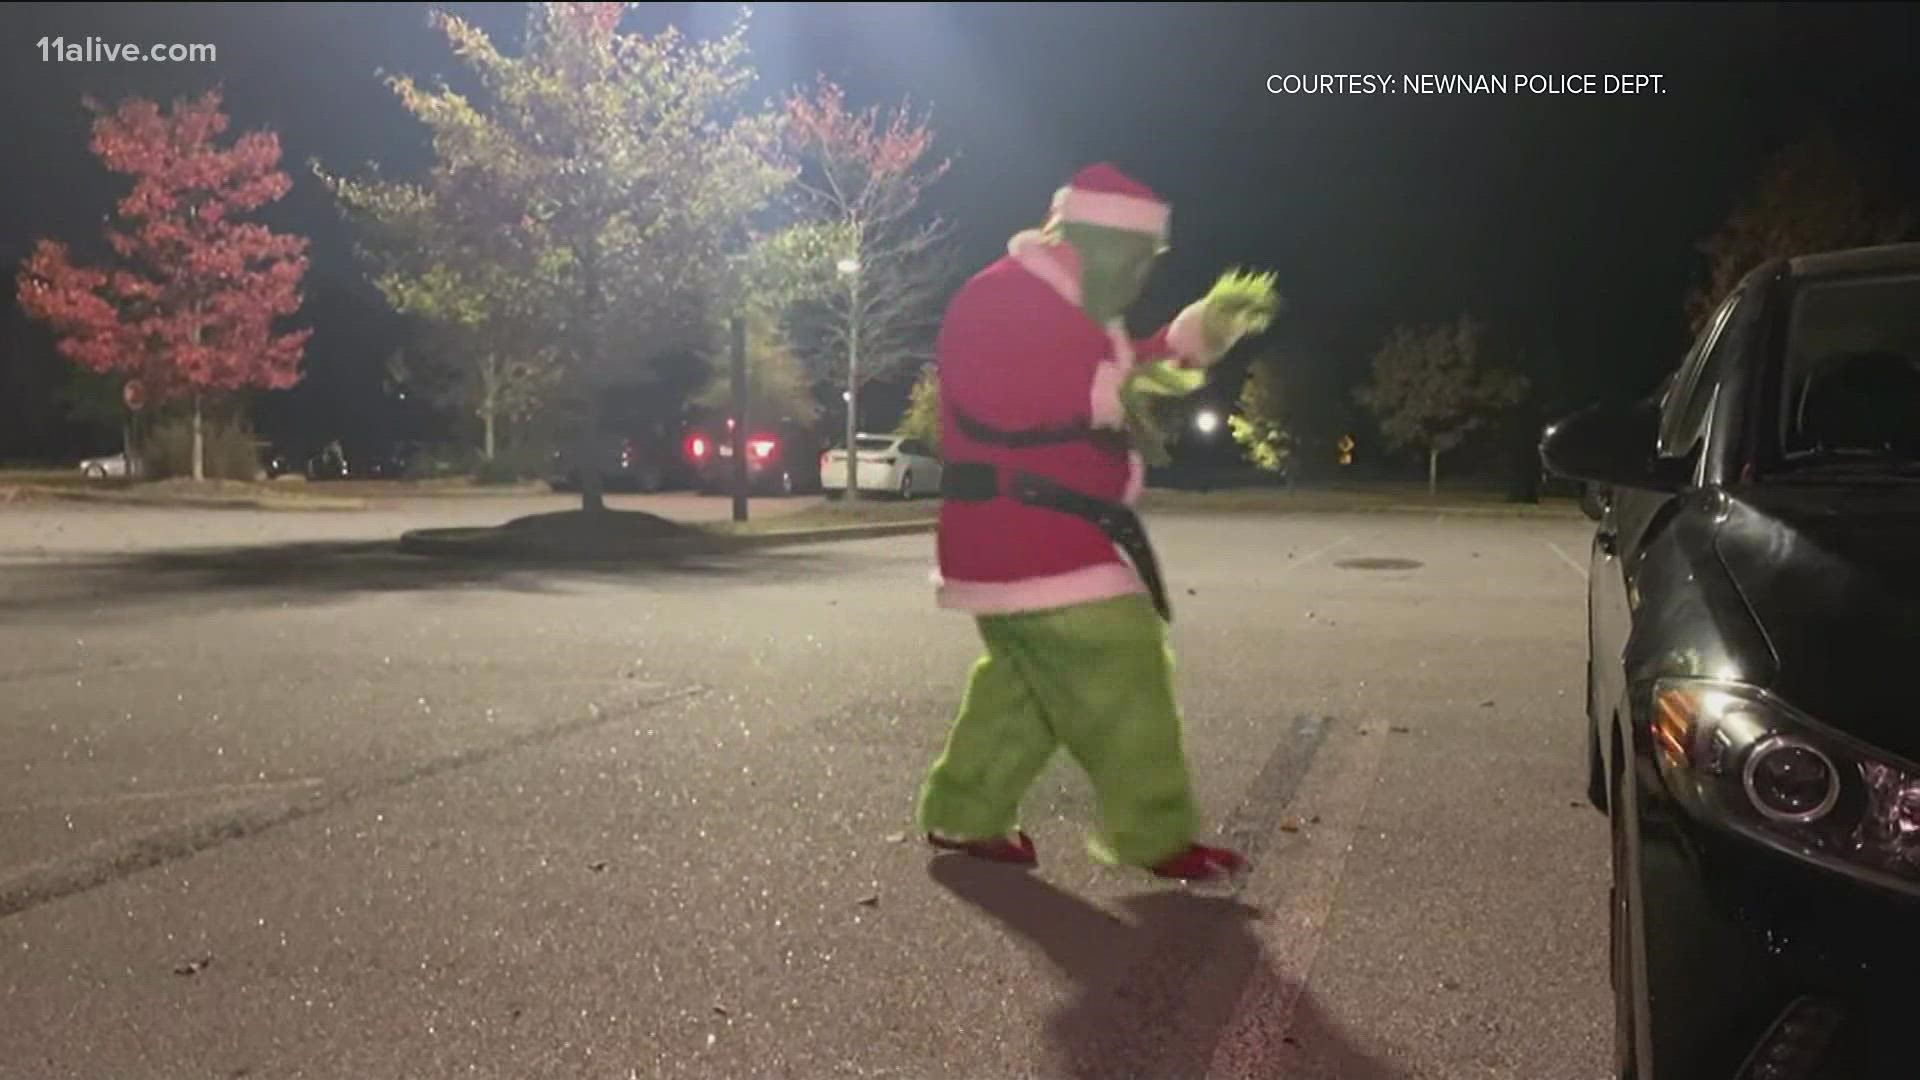 "Not on our watch Mr. Grinch," the Newnan Police Department stated.